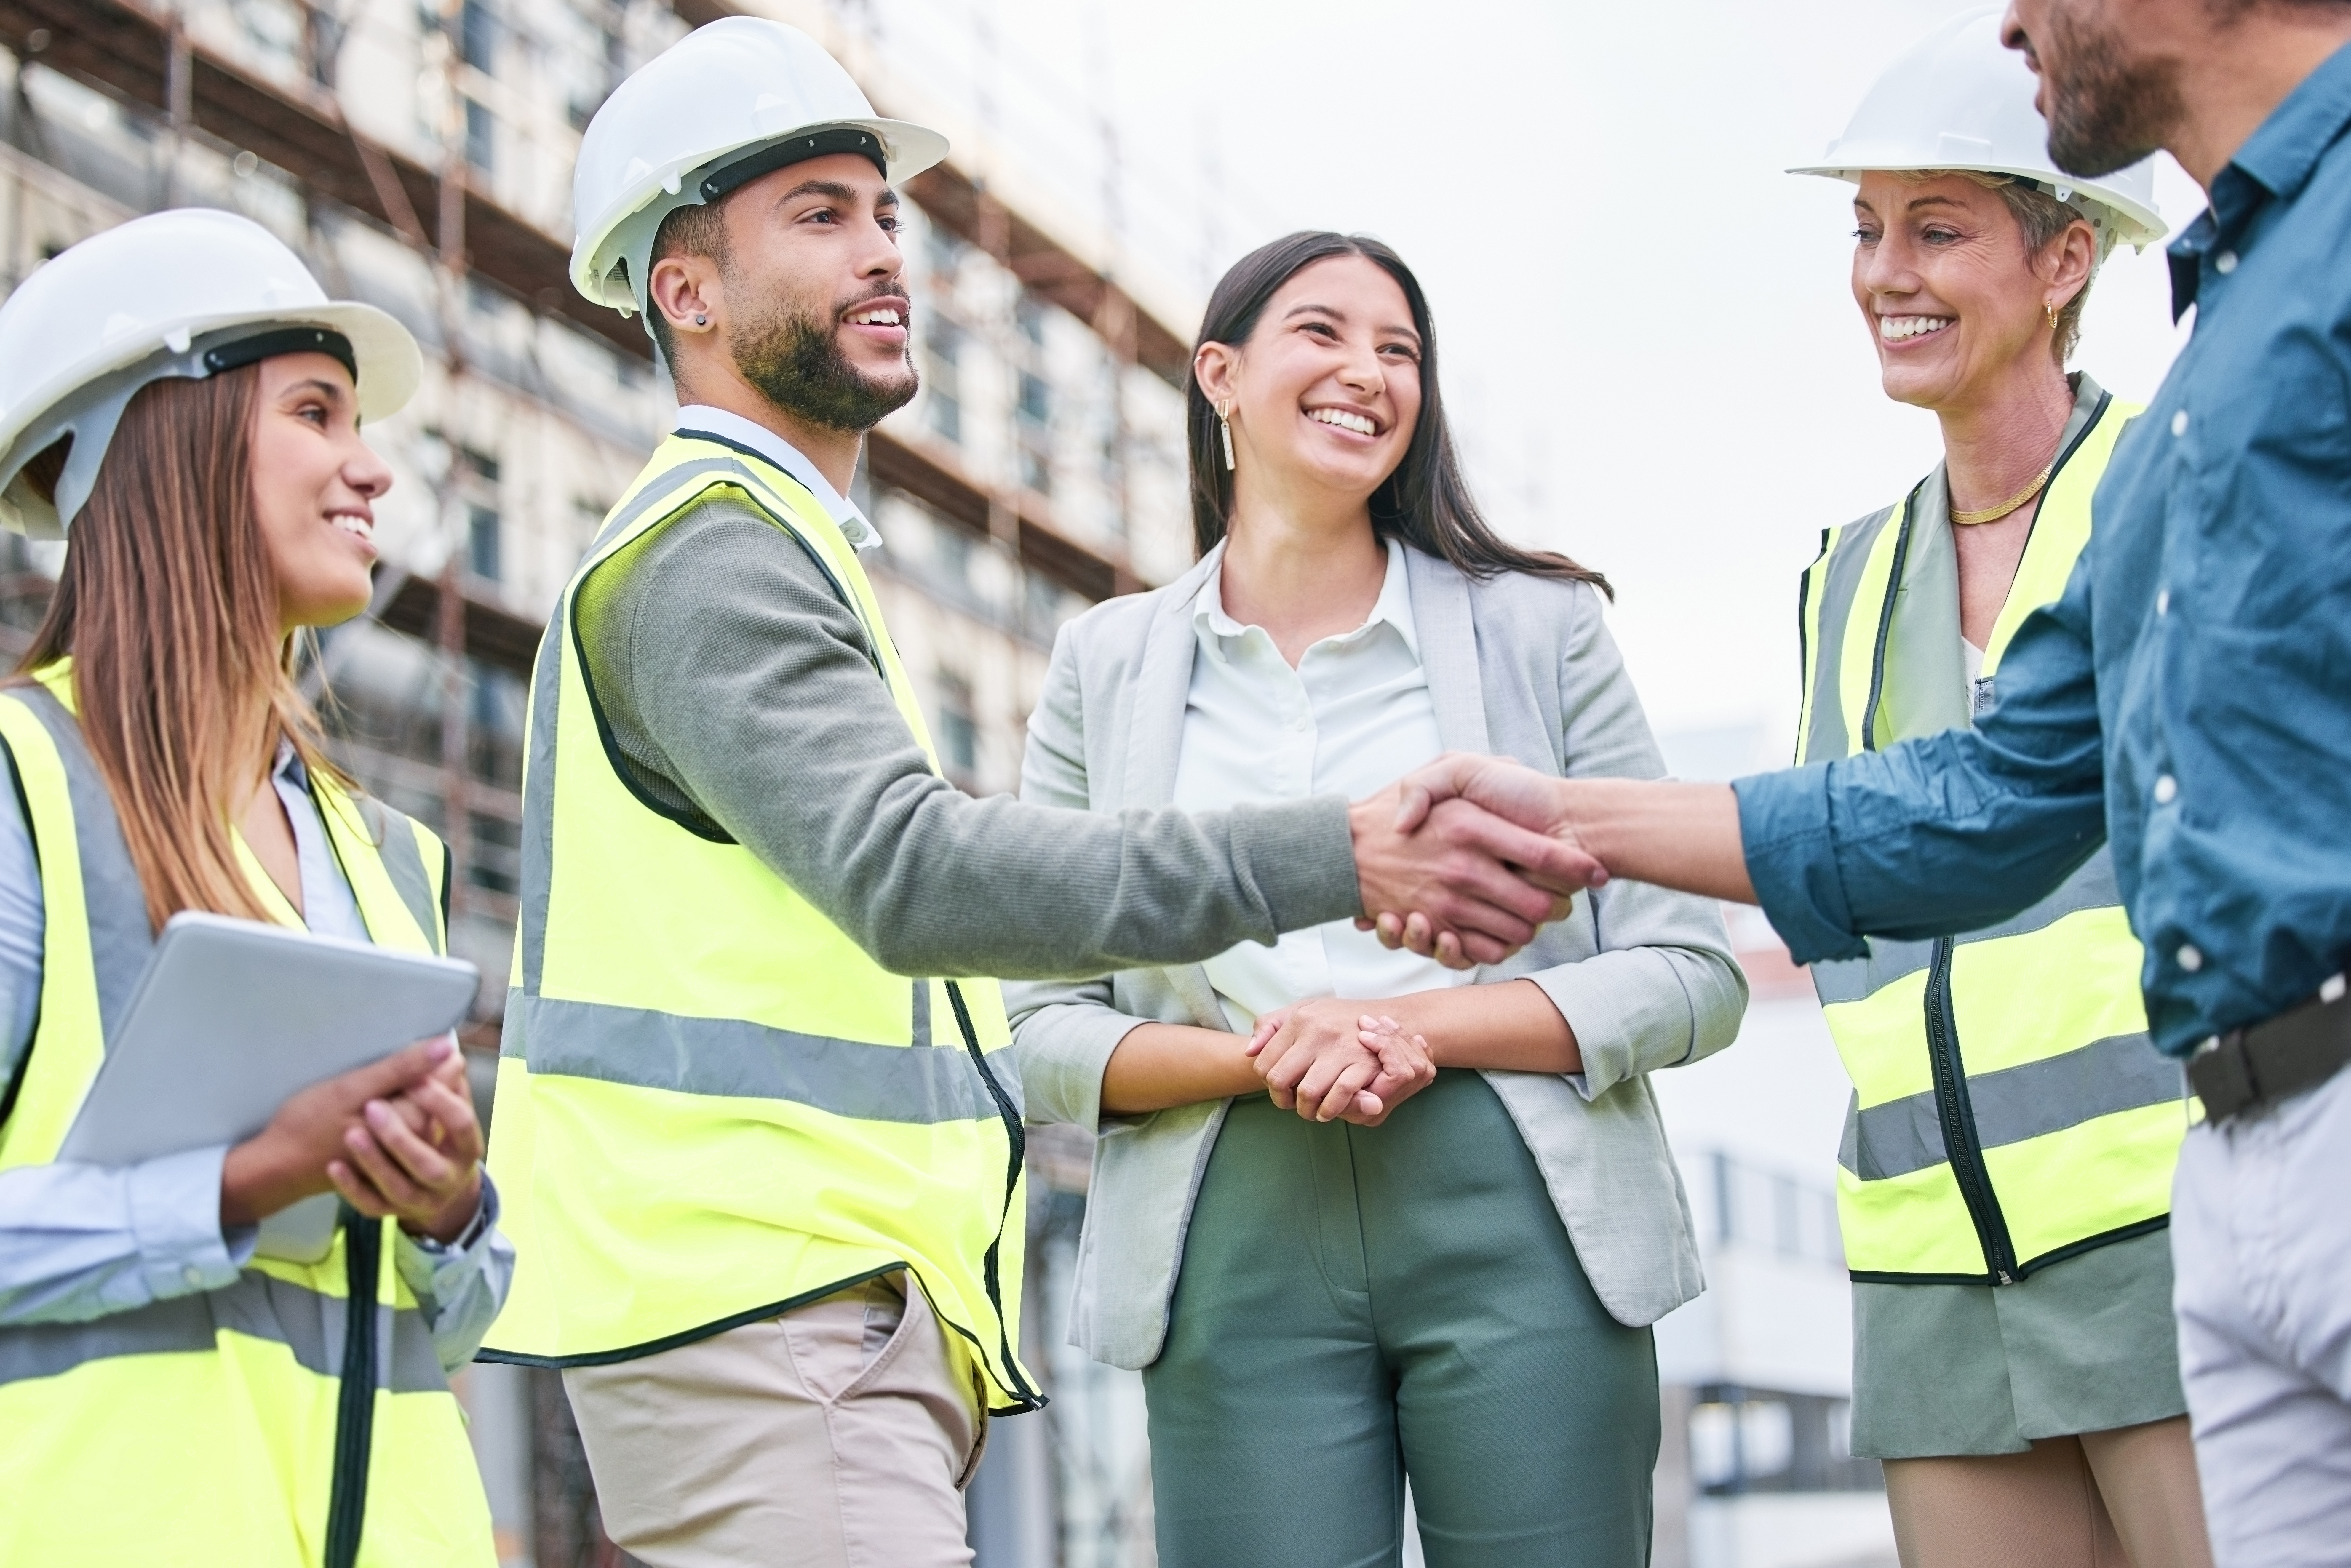 Shot of a team of builders shaking hands on a construction site outside.